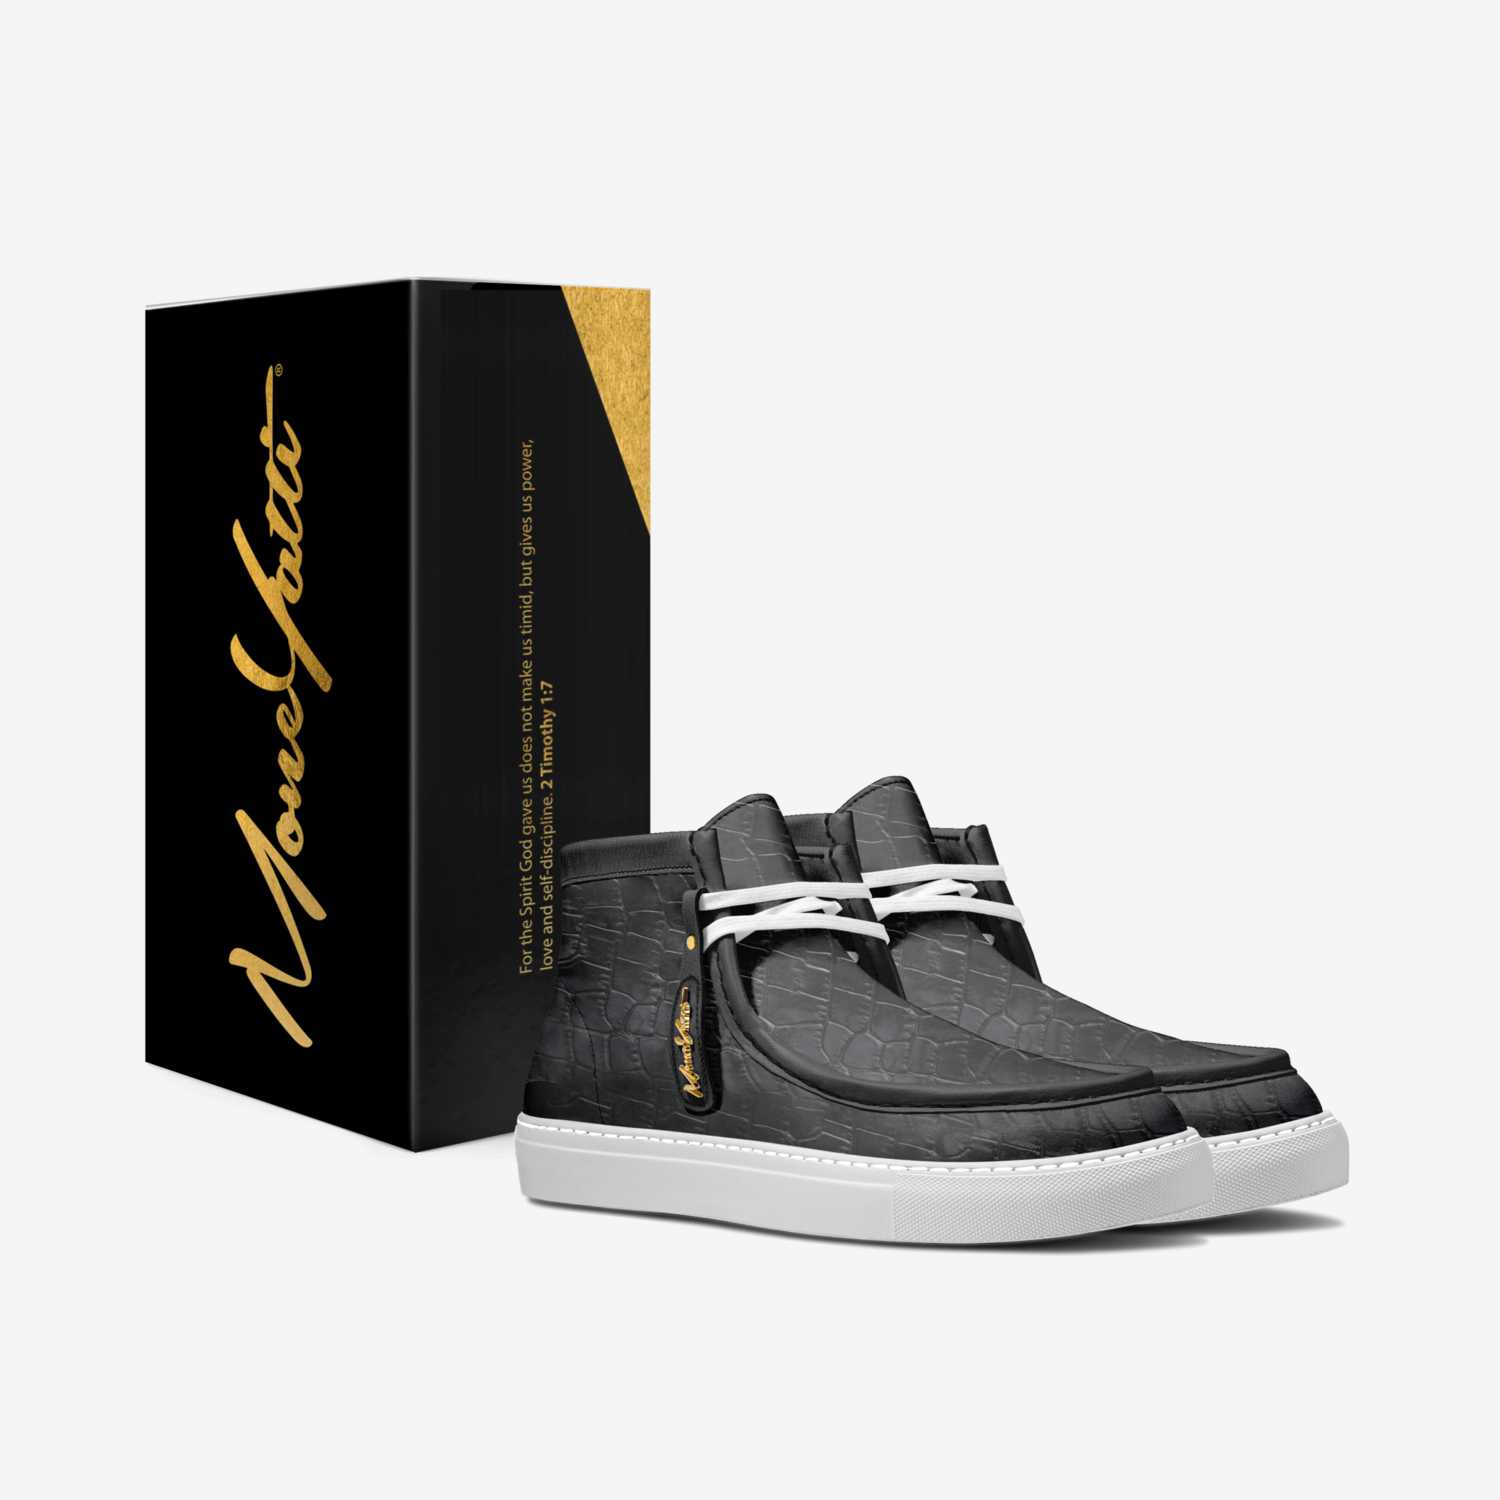 LUX 003 custom made in Italy shoes by Moneyatti Brand | Box view